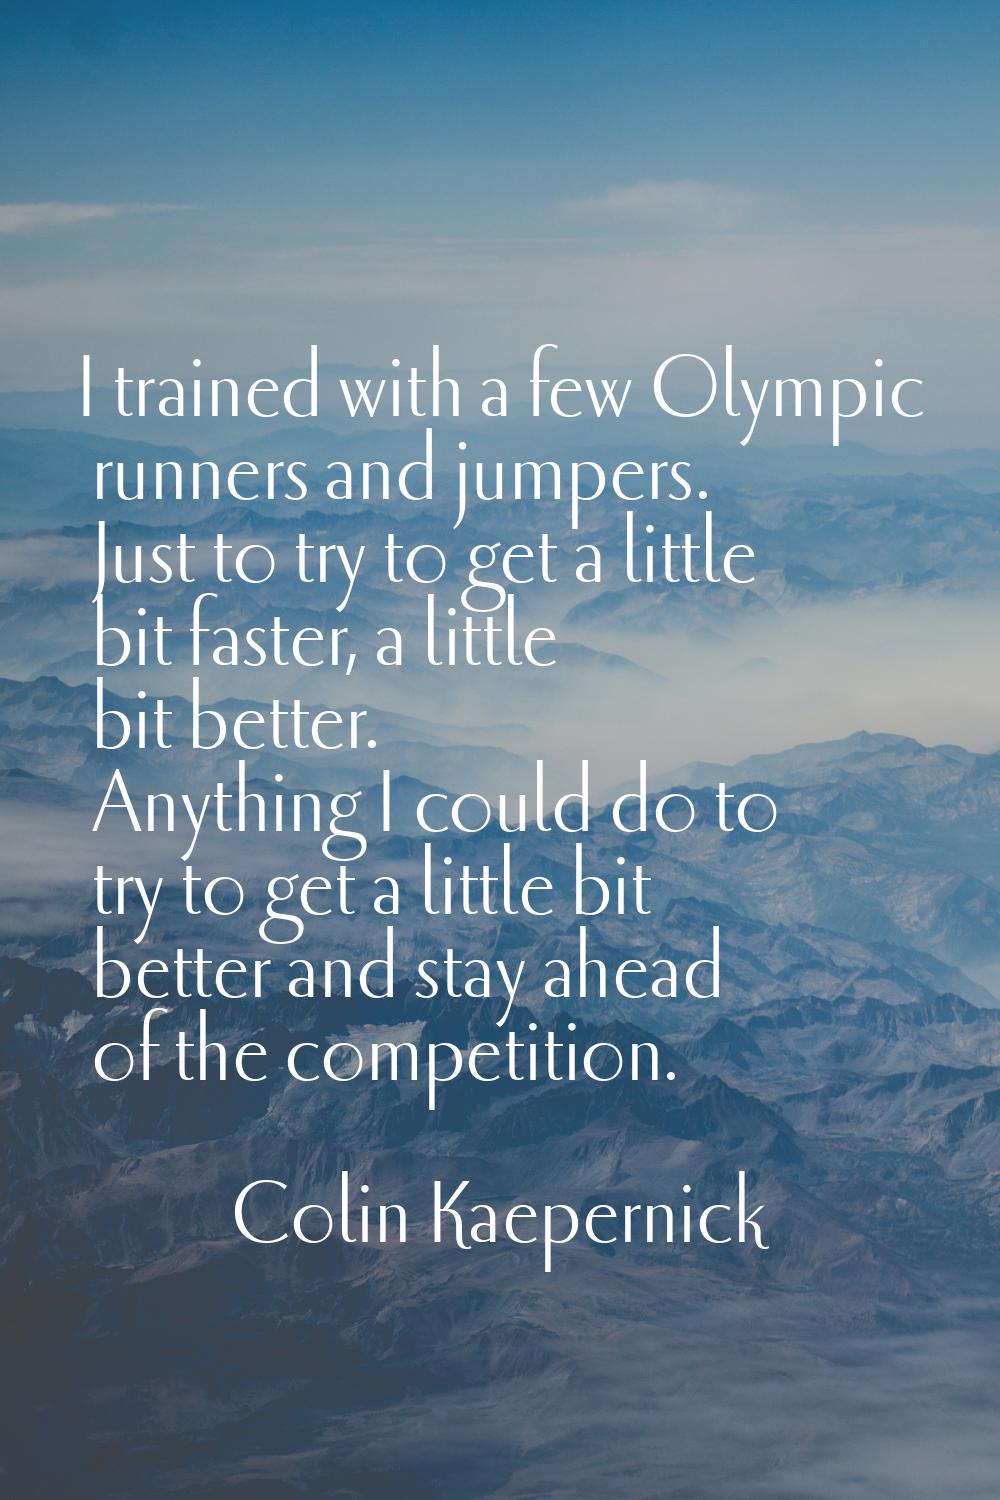 I trained with a few Olympic runners and jumpers. Just to try to get a little bit faster, a little 